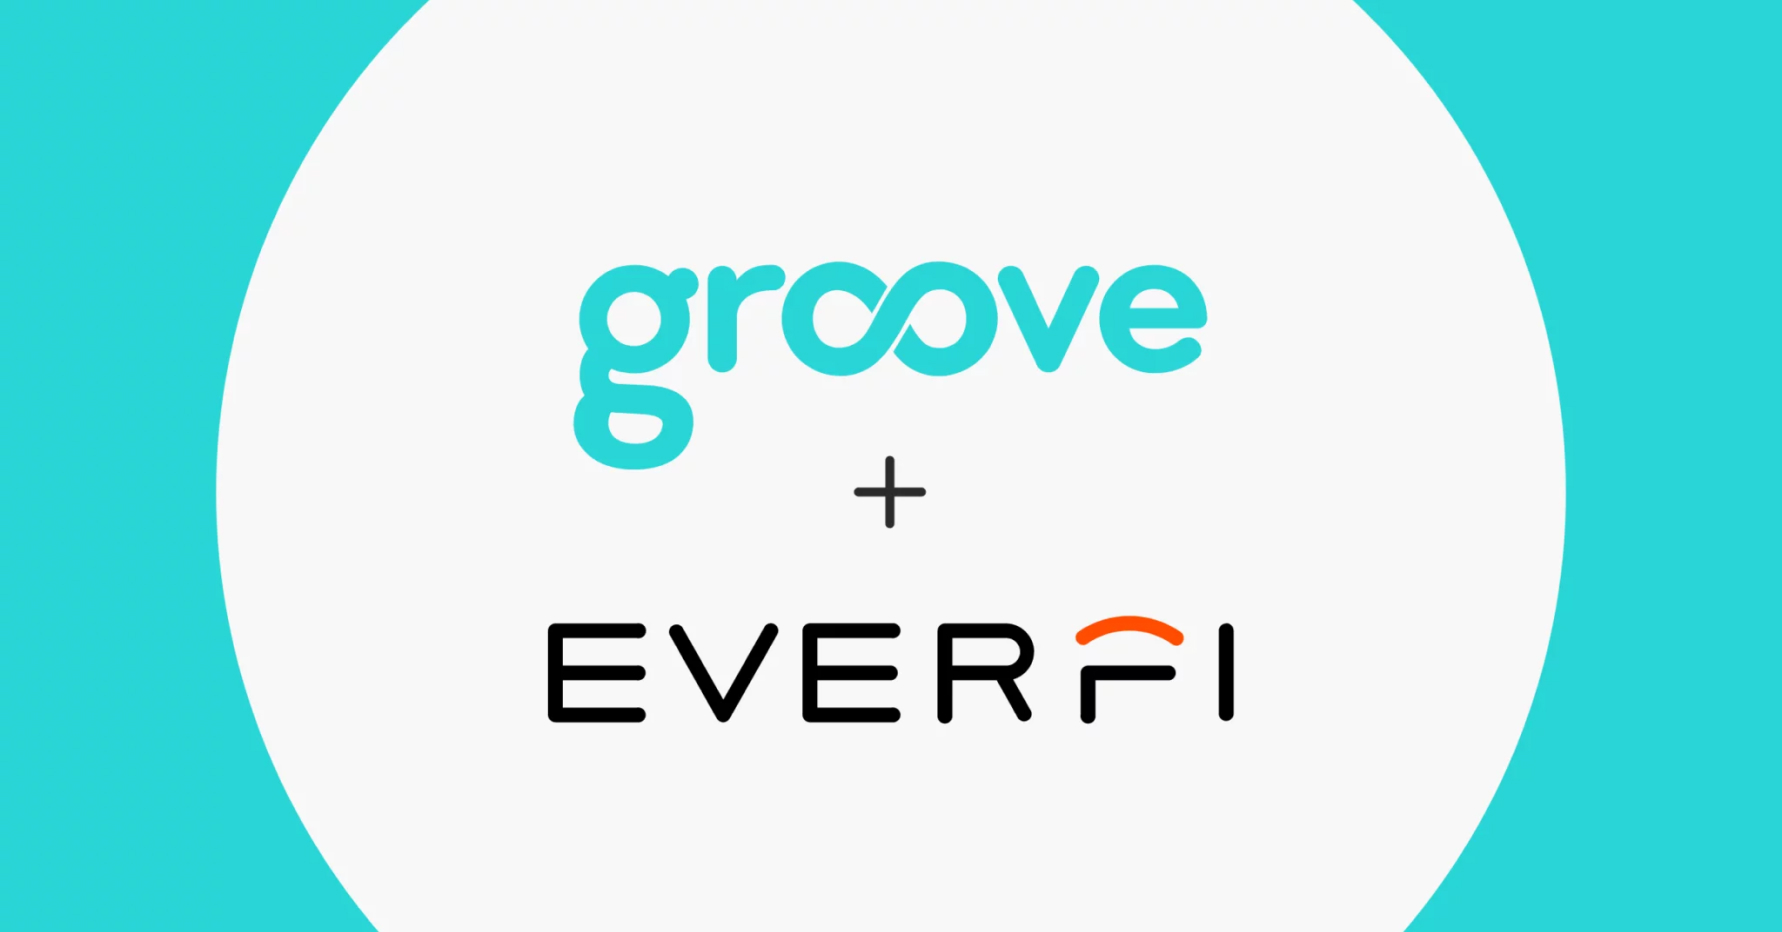 Image with Groove and EVERFI logos